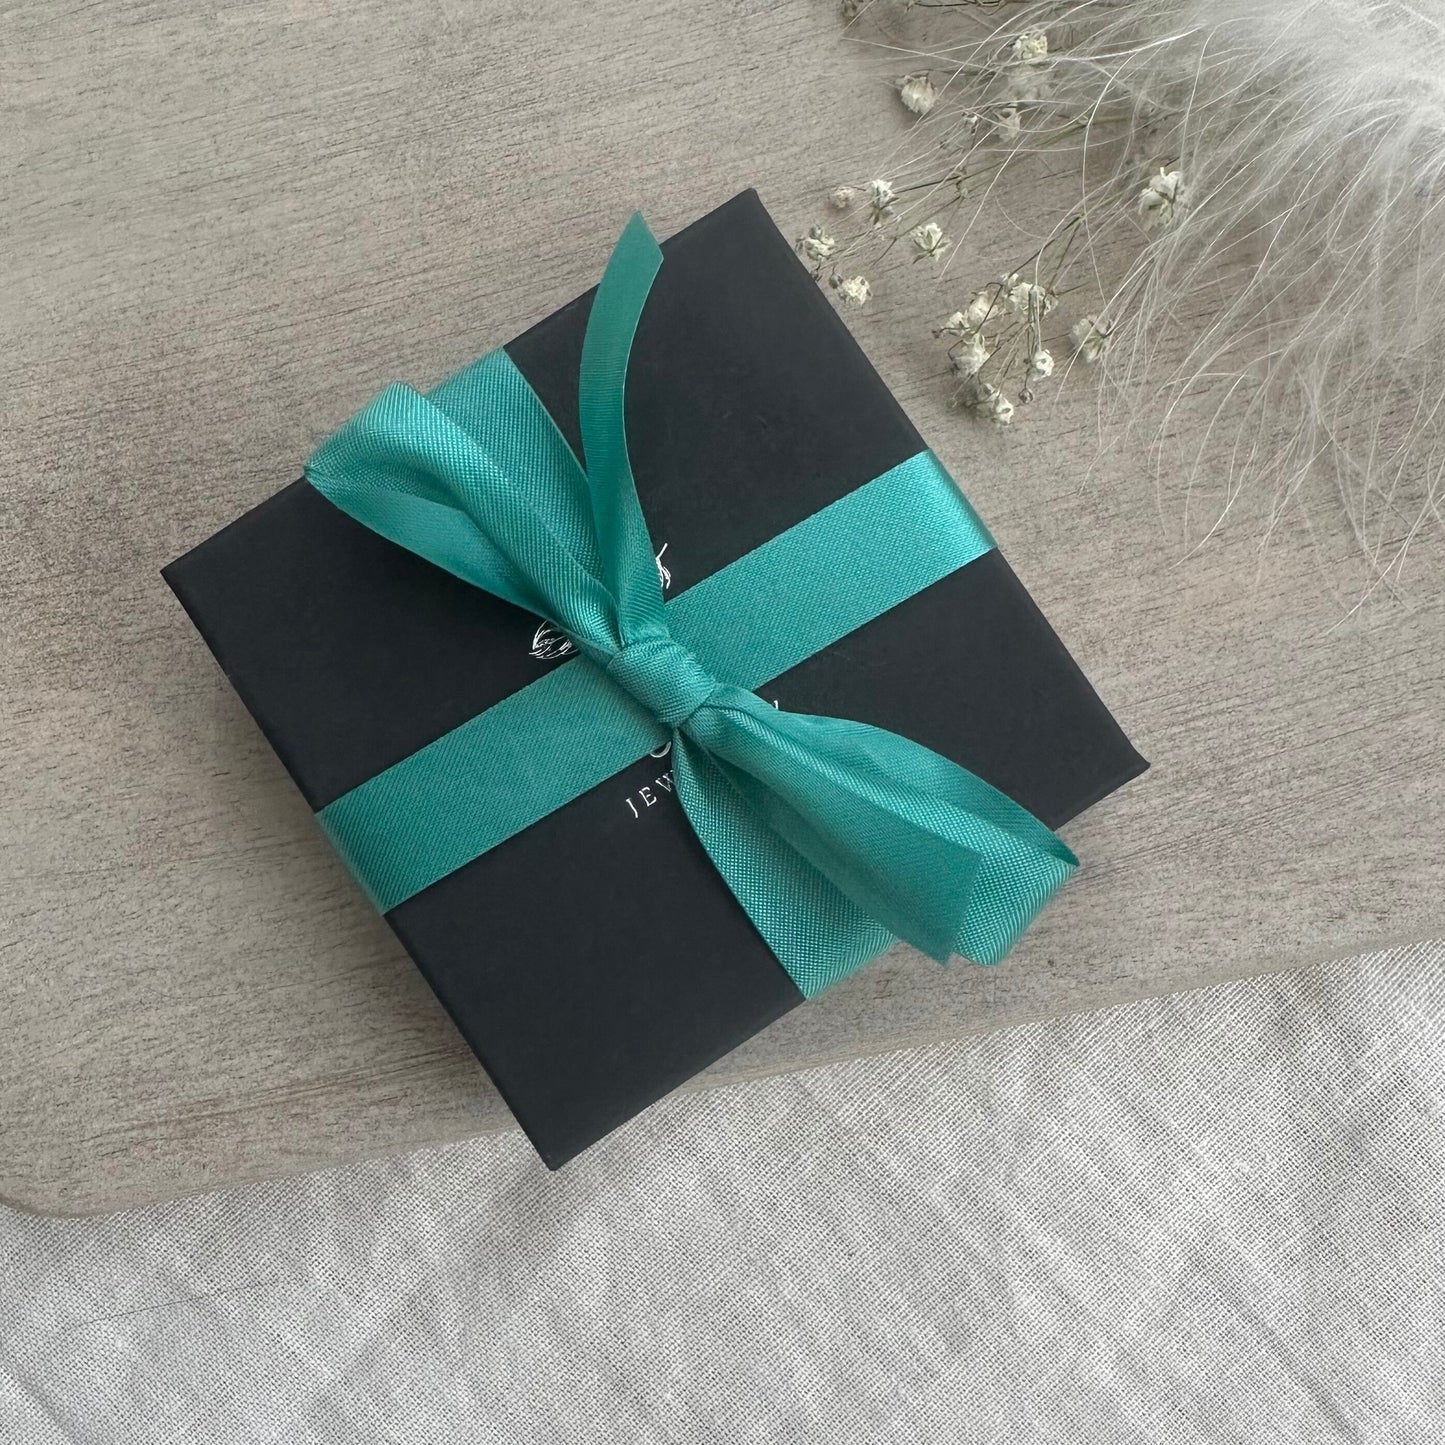 a gift wrapped in a black and teal ribbon